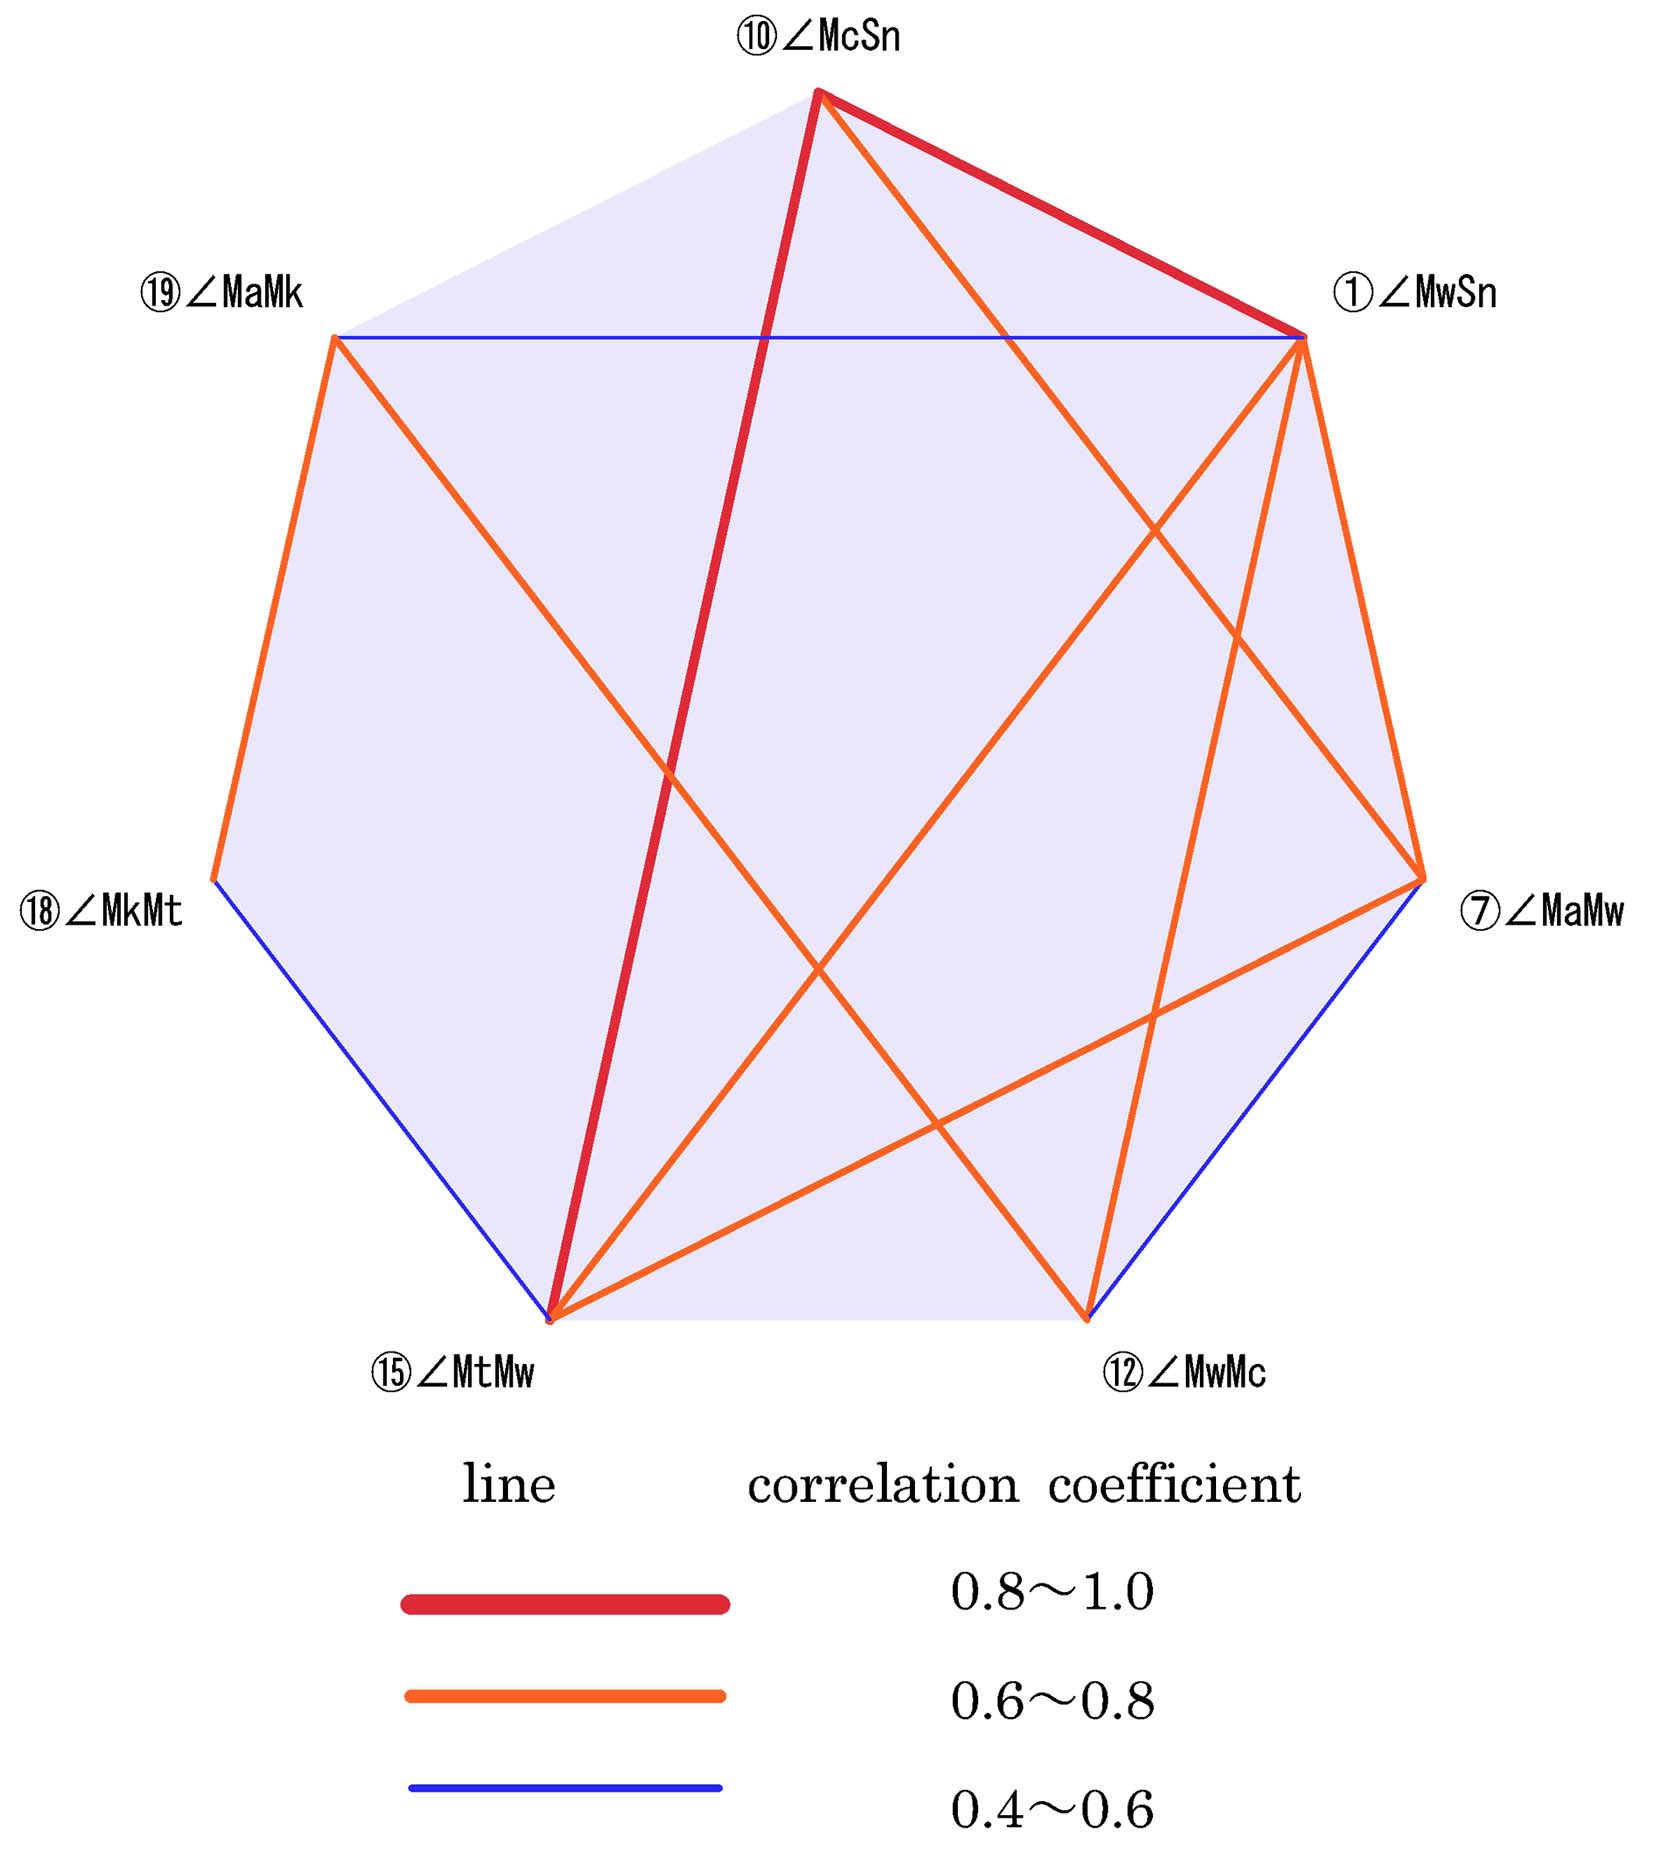 Pearson product moment correlation coefficients among axis angle. Number of subjects=13.